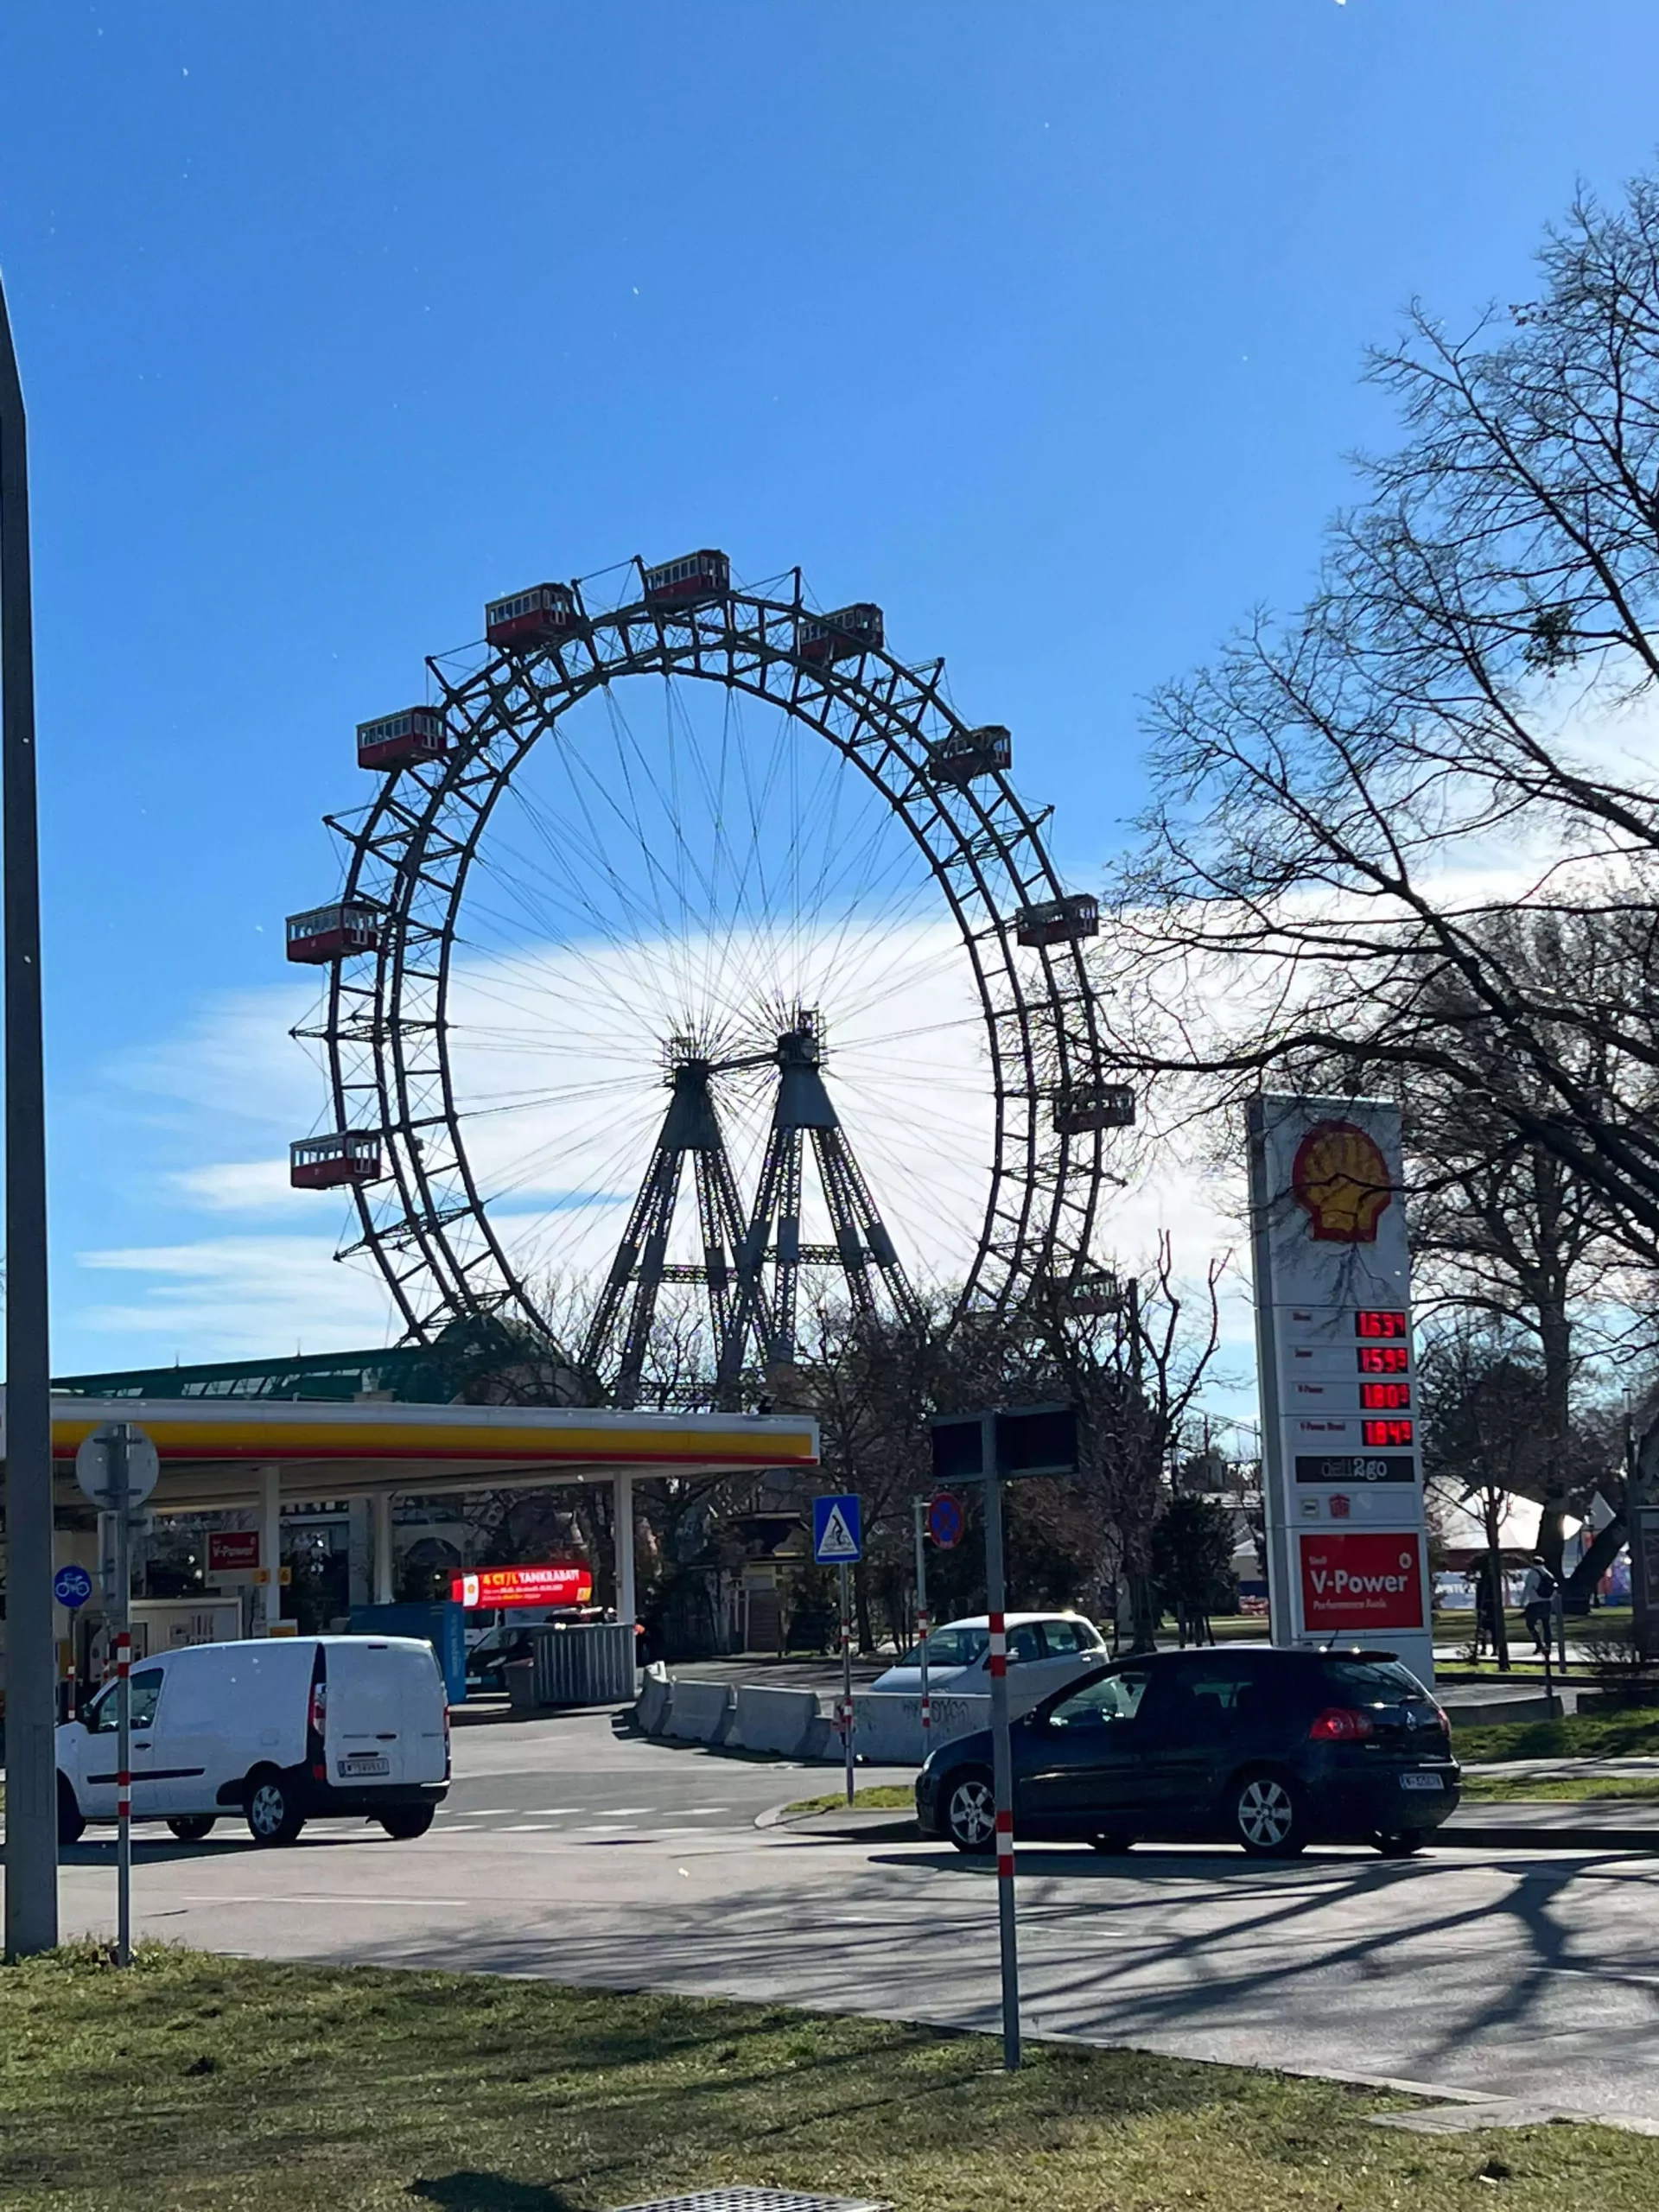 Ride the Giant Ferris Wheel at the Prater